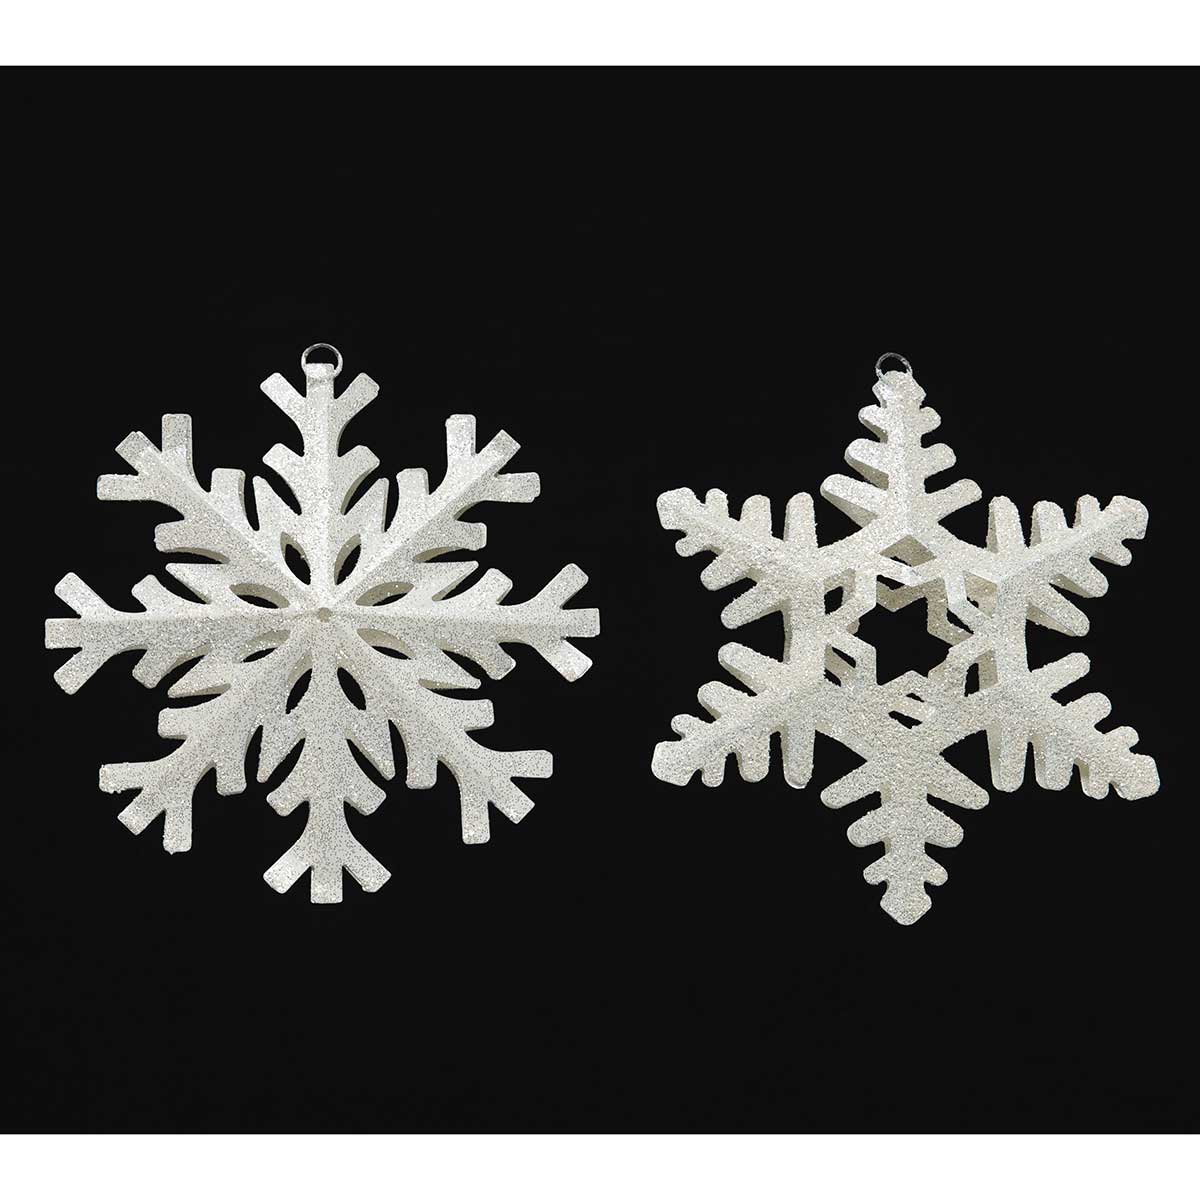 ORNAMENT SNOWFLAKE 2 ASSORTED LARGE 8IN WHITE METAL